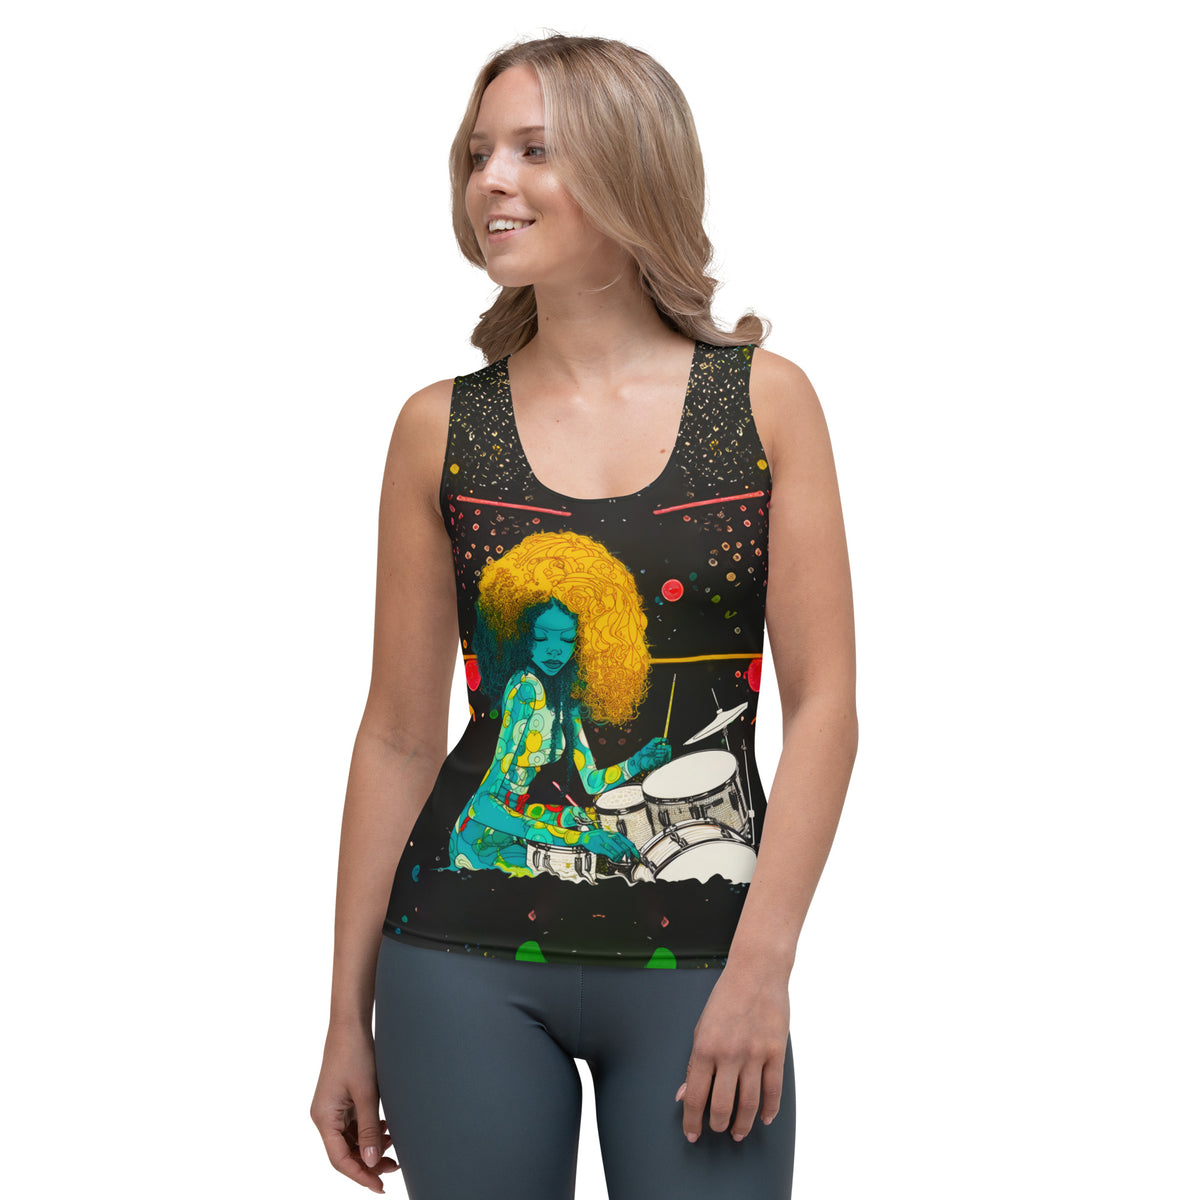 Floral Fantasy Women's Tank Top on a clothing mannequin.